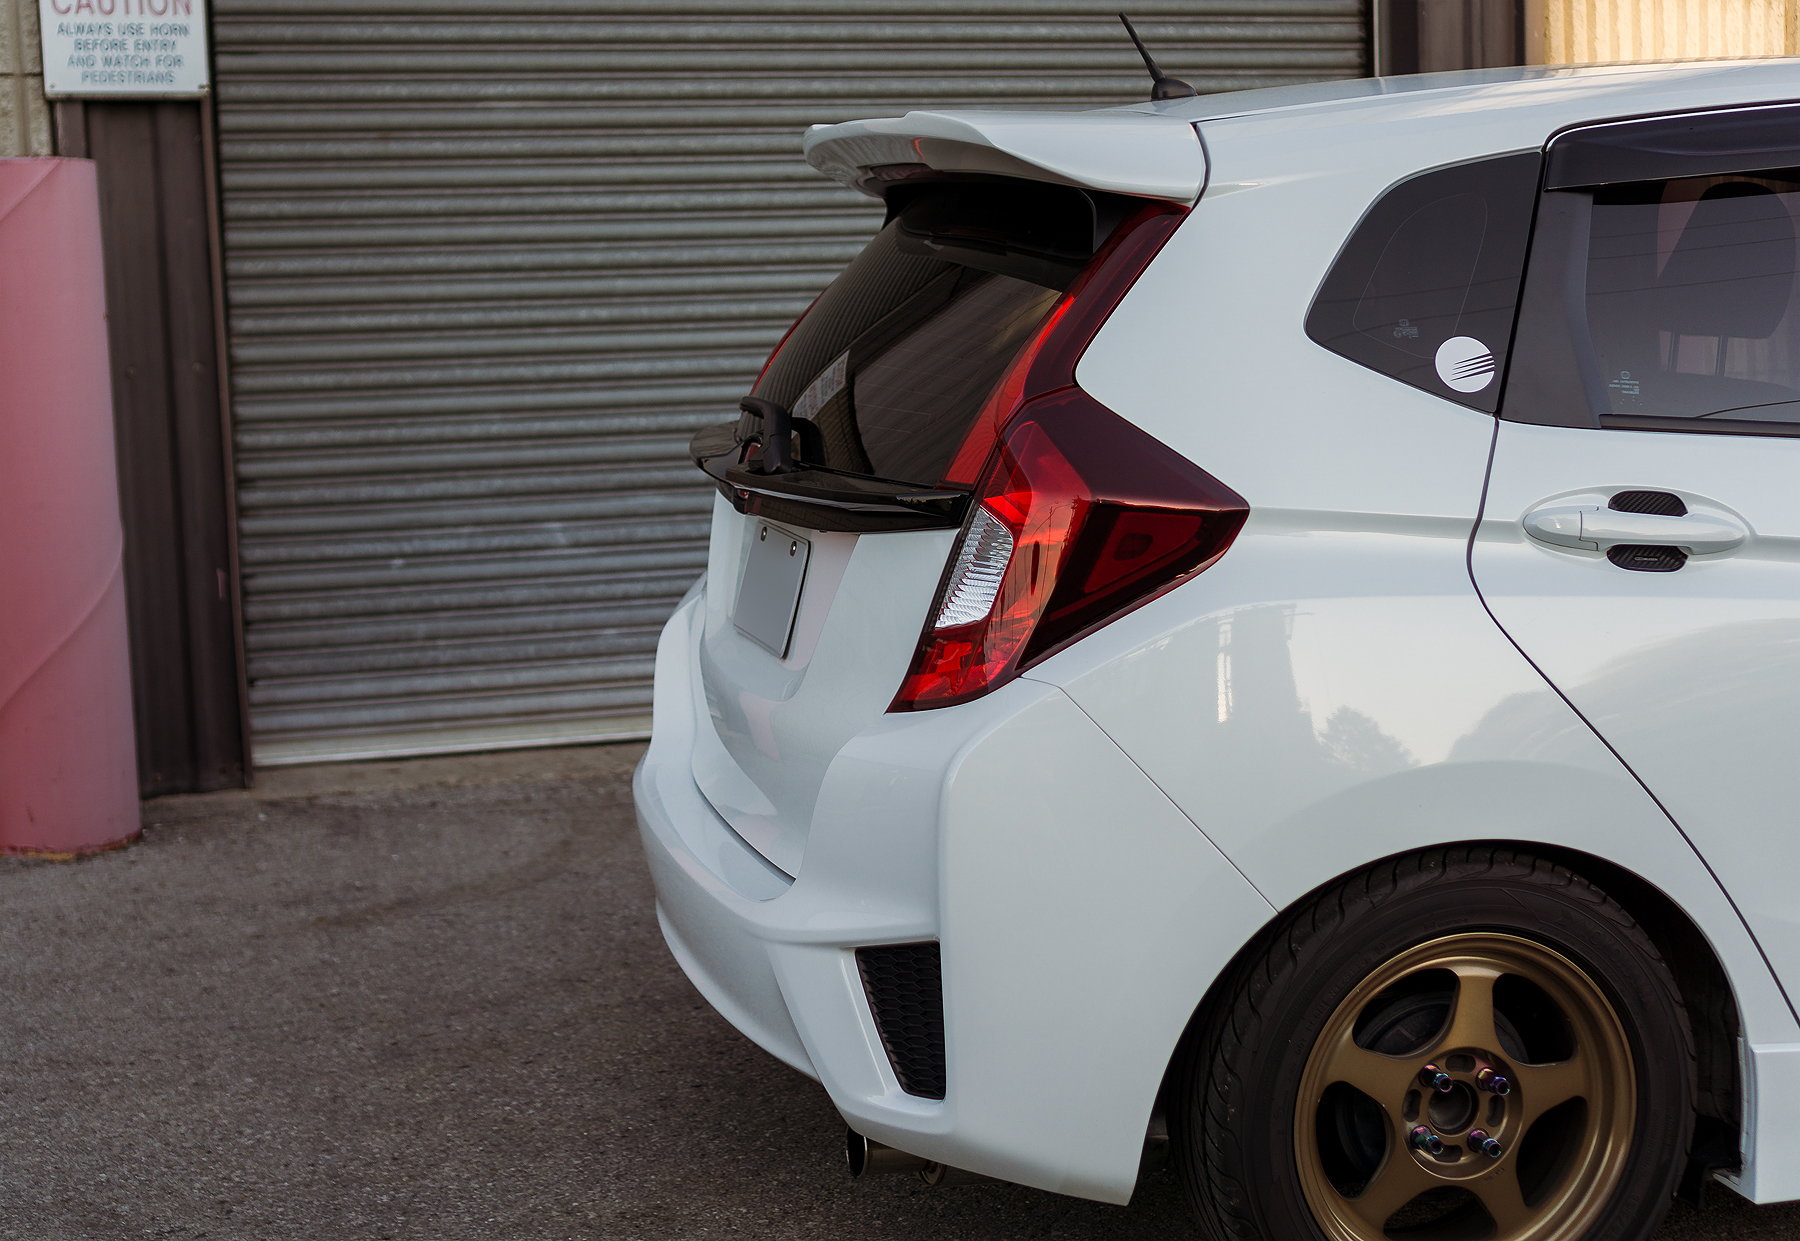 LegenD s GK5 Build Thread Page 3 Unofficial Honda FIT 